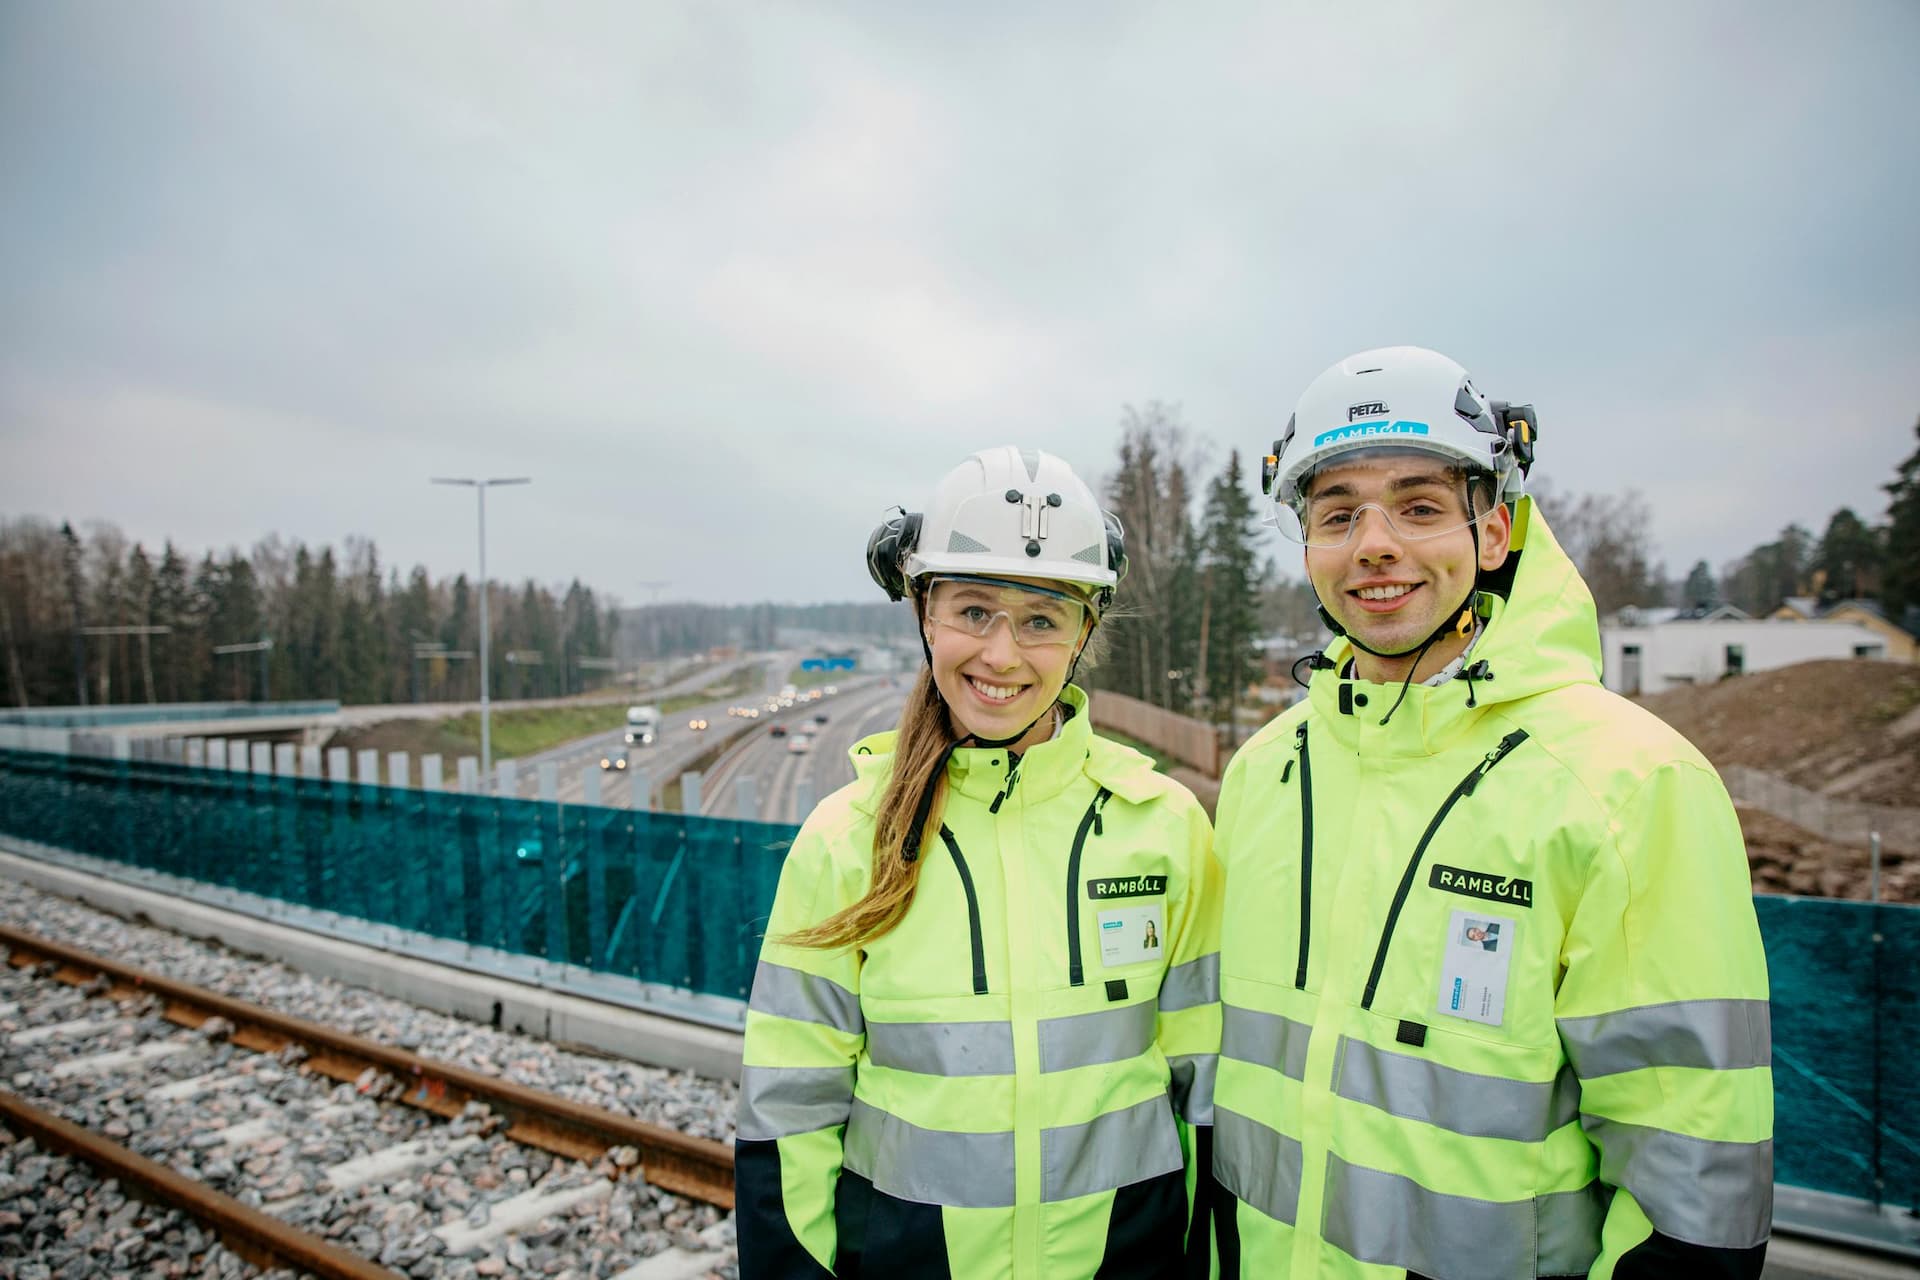 RFI brand picture photoshoot in Espoo, Finland. Taken in October 2021. In the picture two people stand on a bridge on Ring I motorway in Espoo wearing a high-visibility jacket and helmet.